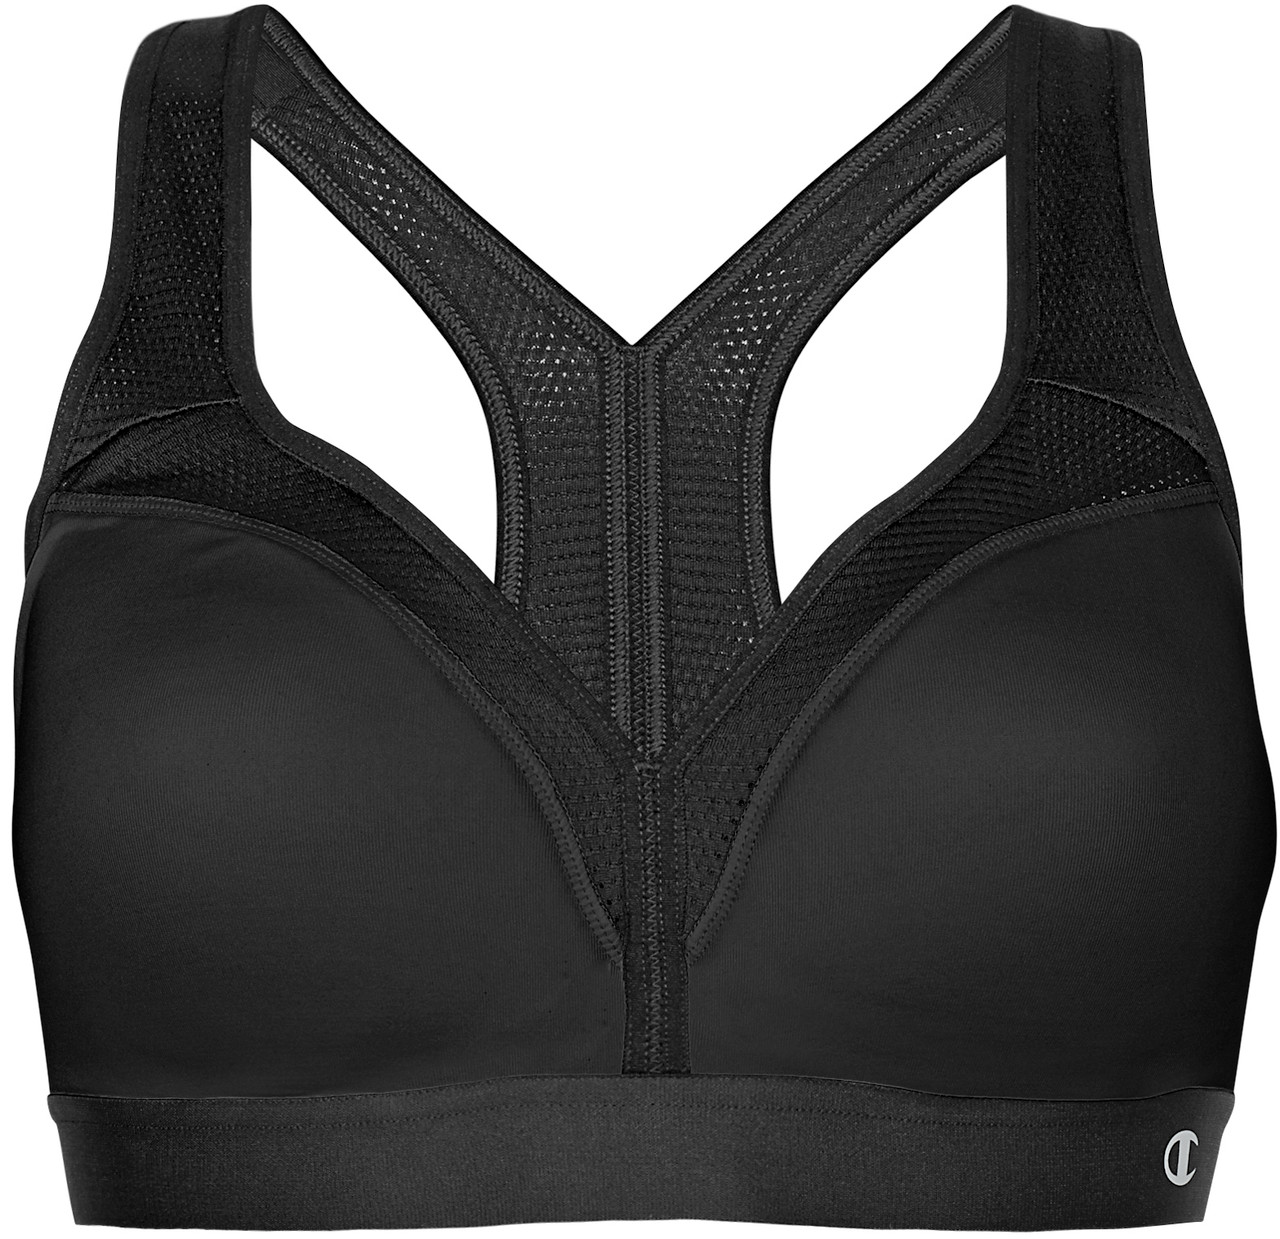 Champion Women's Med Support Curvy with Sewn in Cup Sports Bra